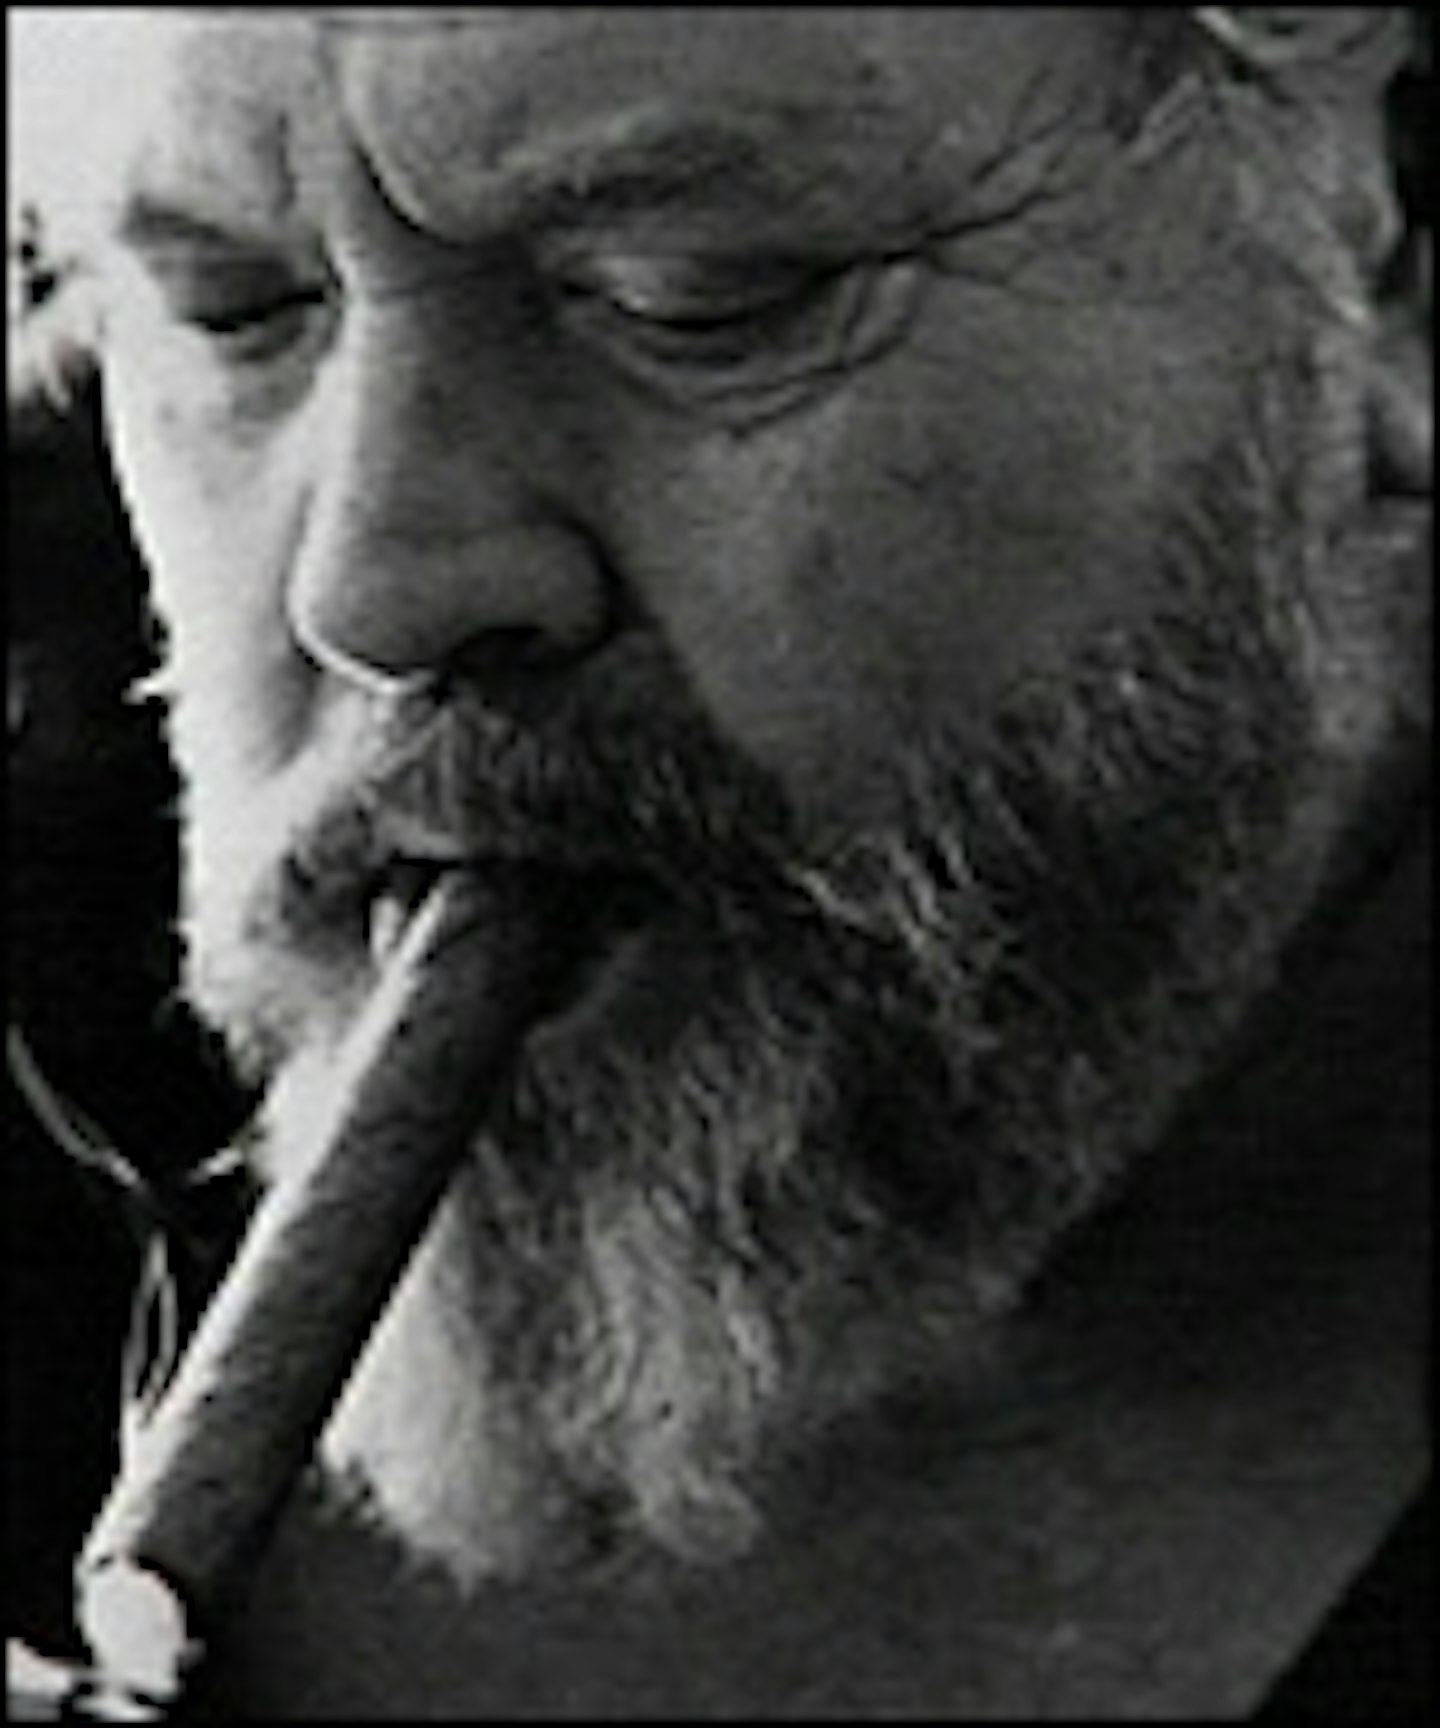 Orson Welles' The Other Side Of The Wind Nears Cinemas